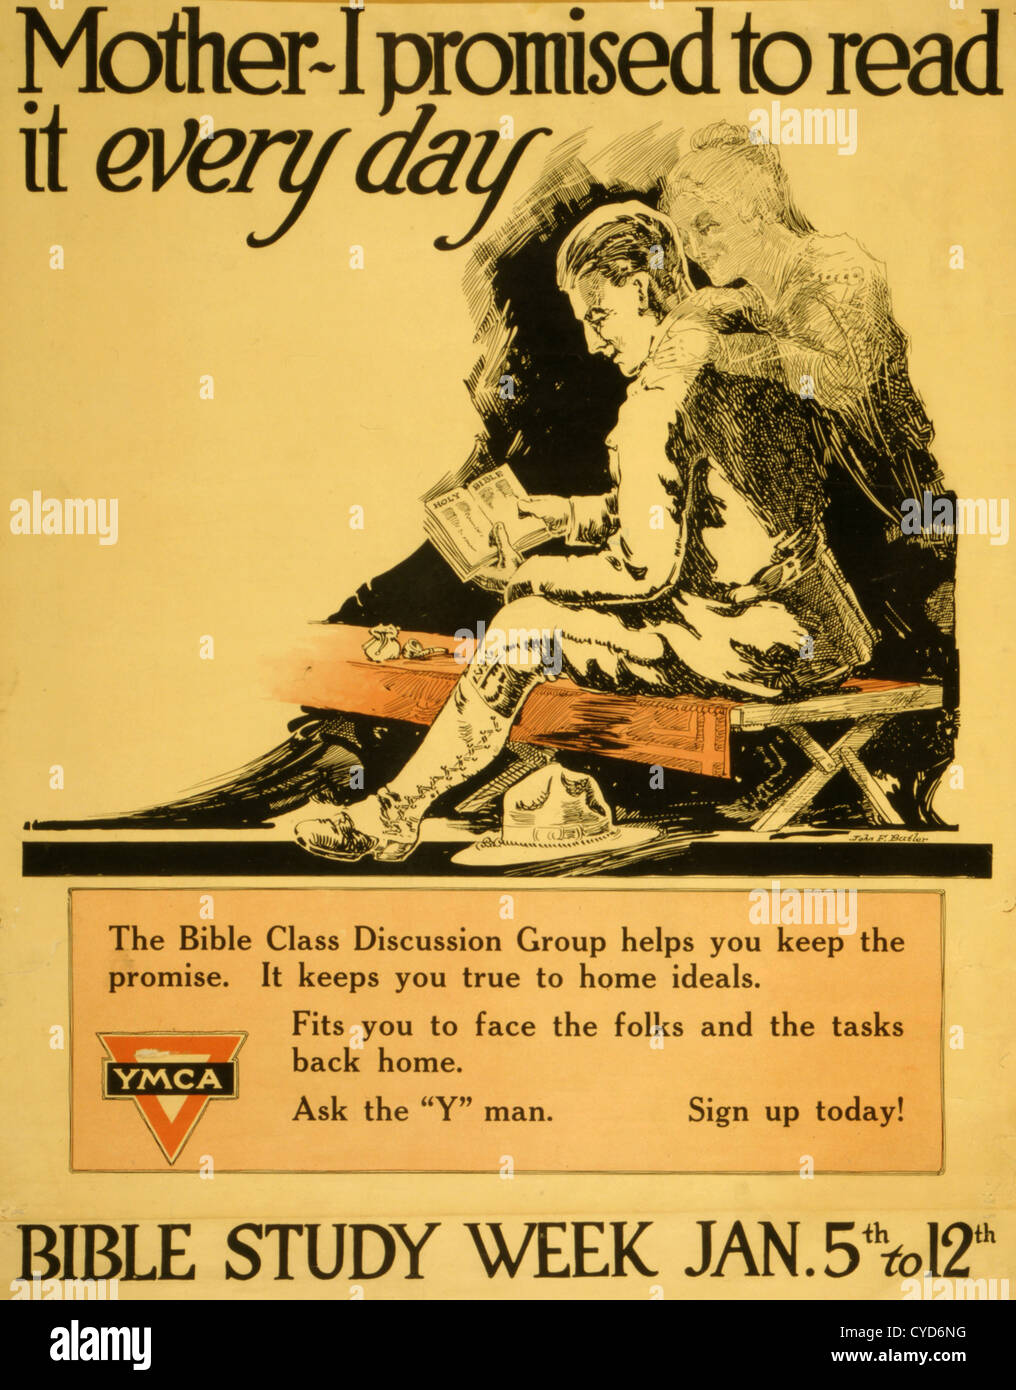 Poster showing a soldier reading the Bible, with a ghostly image of a woman standing over him. Stock Photo